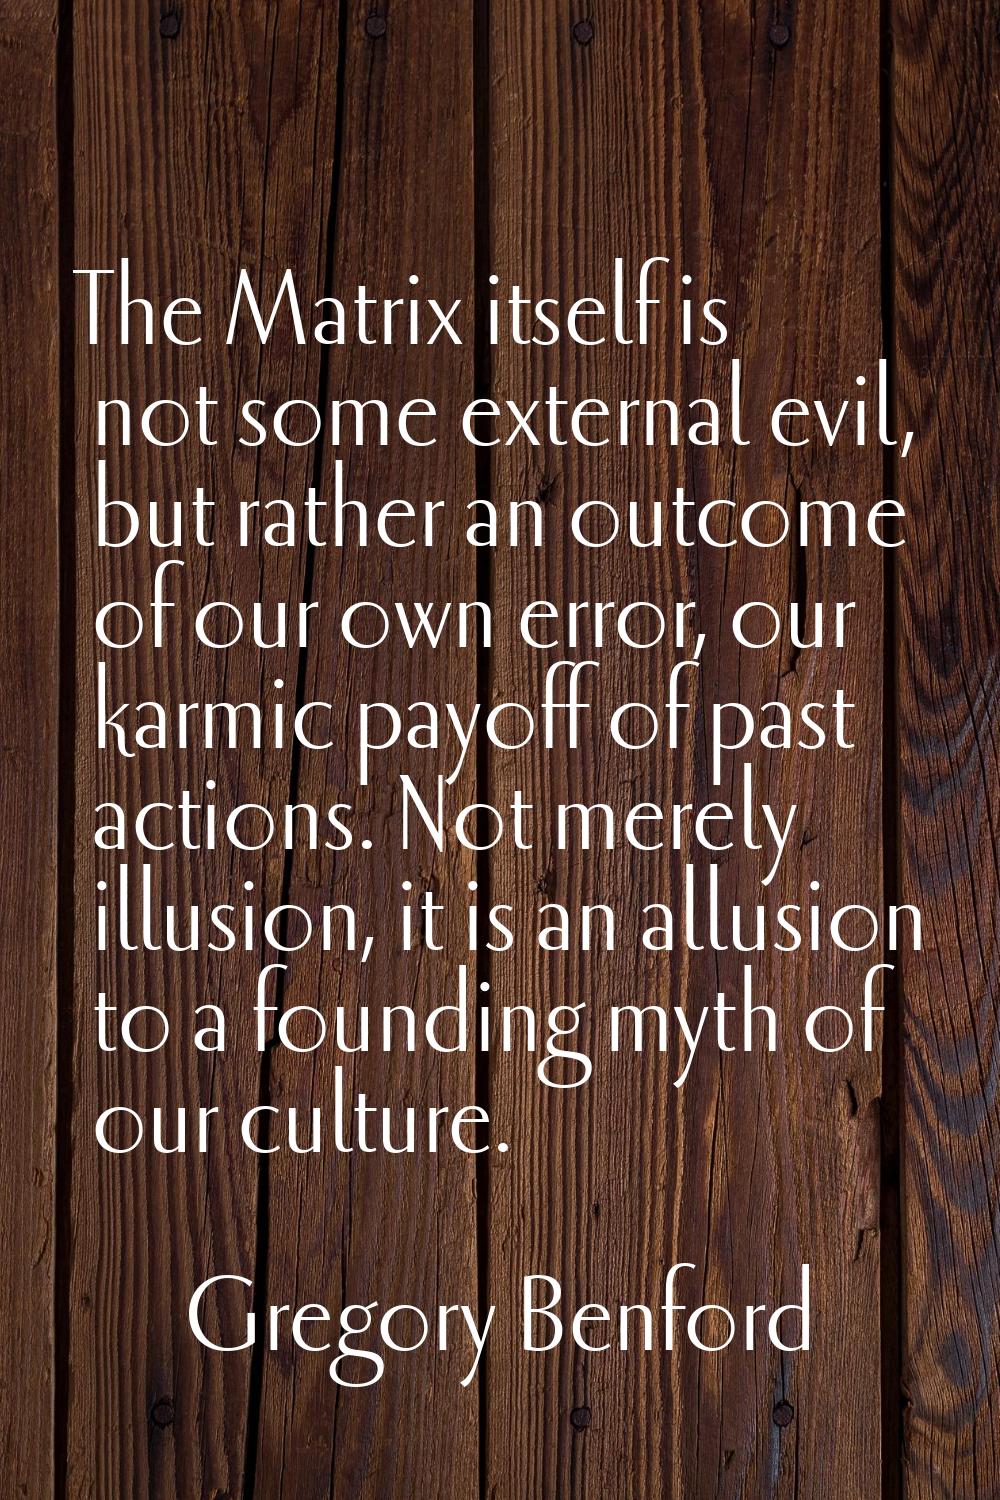 The Matrix itself is not some external evil, but rather an outcome of our own error, our karmic pay